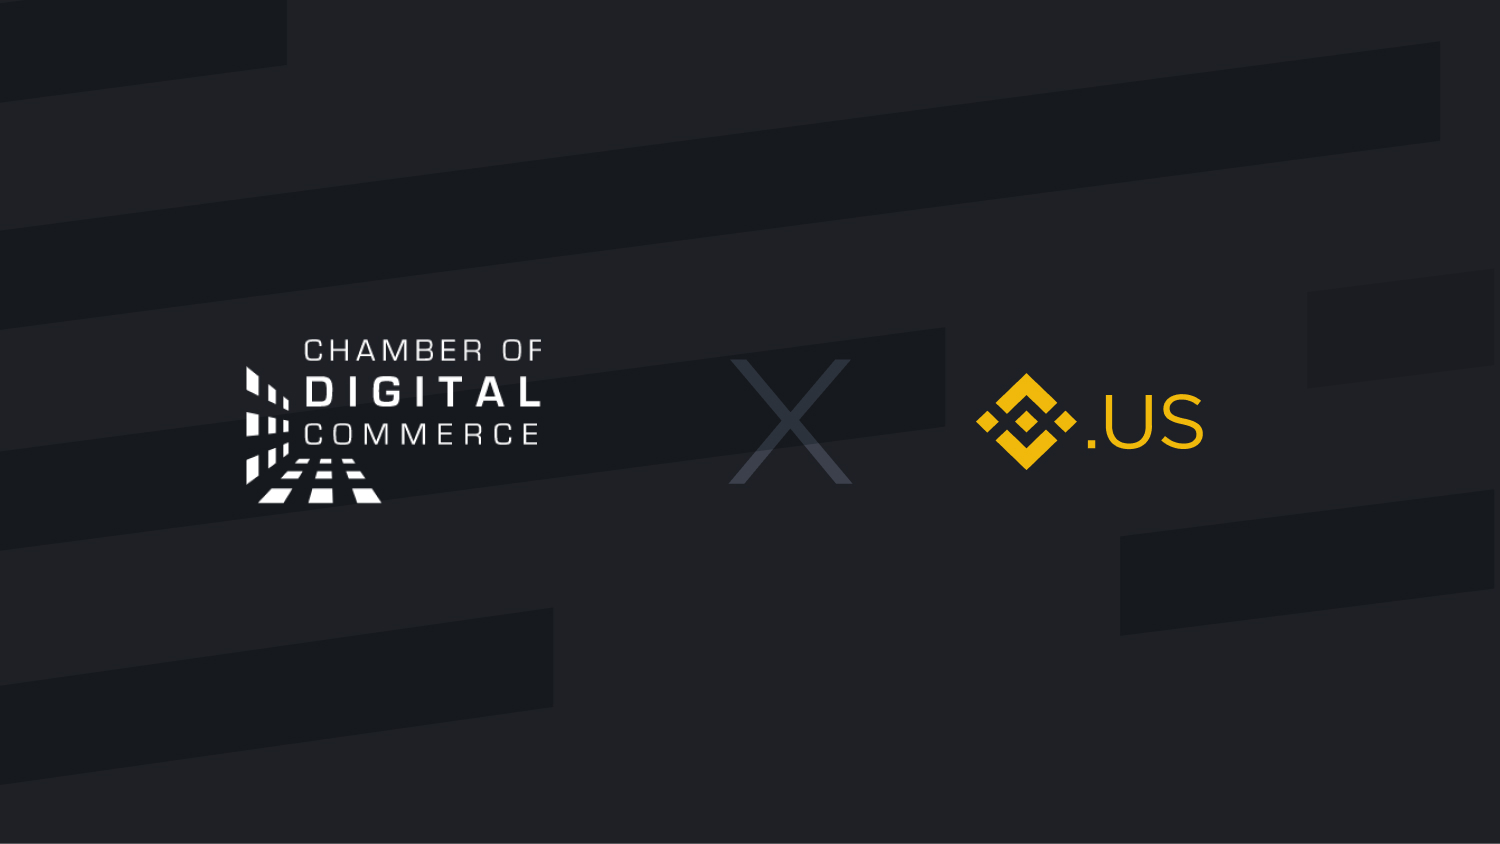 Binance.US Joins the Executive Committee of the Chamber of Digital Commerce